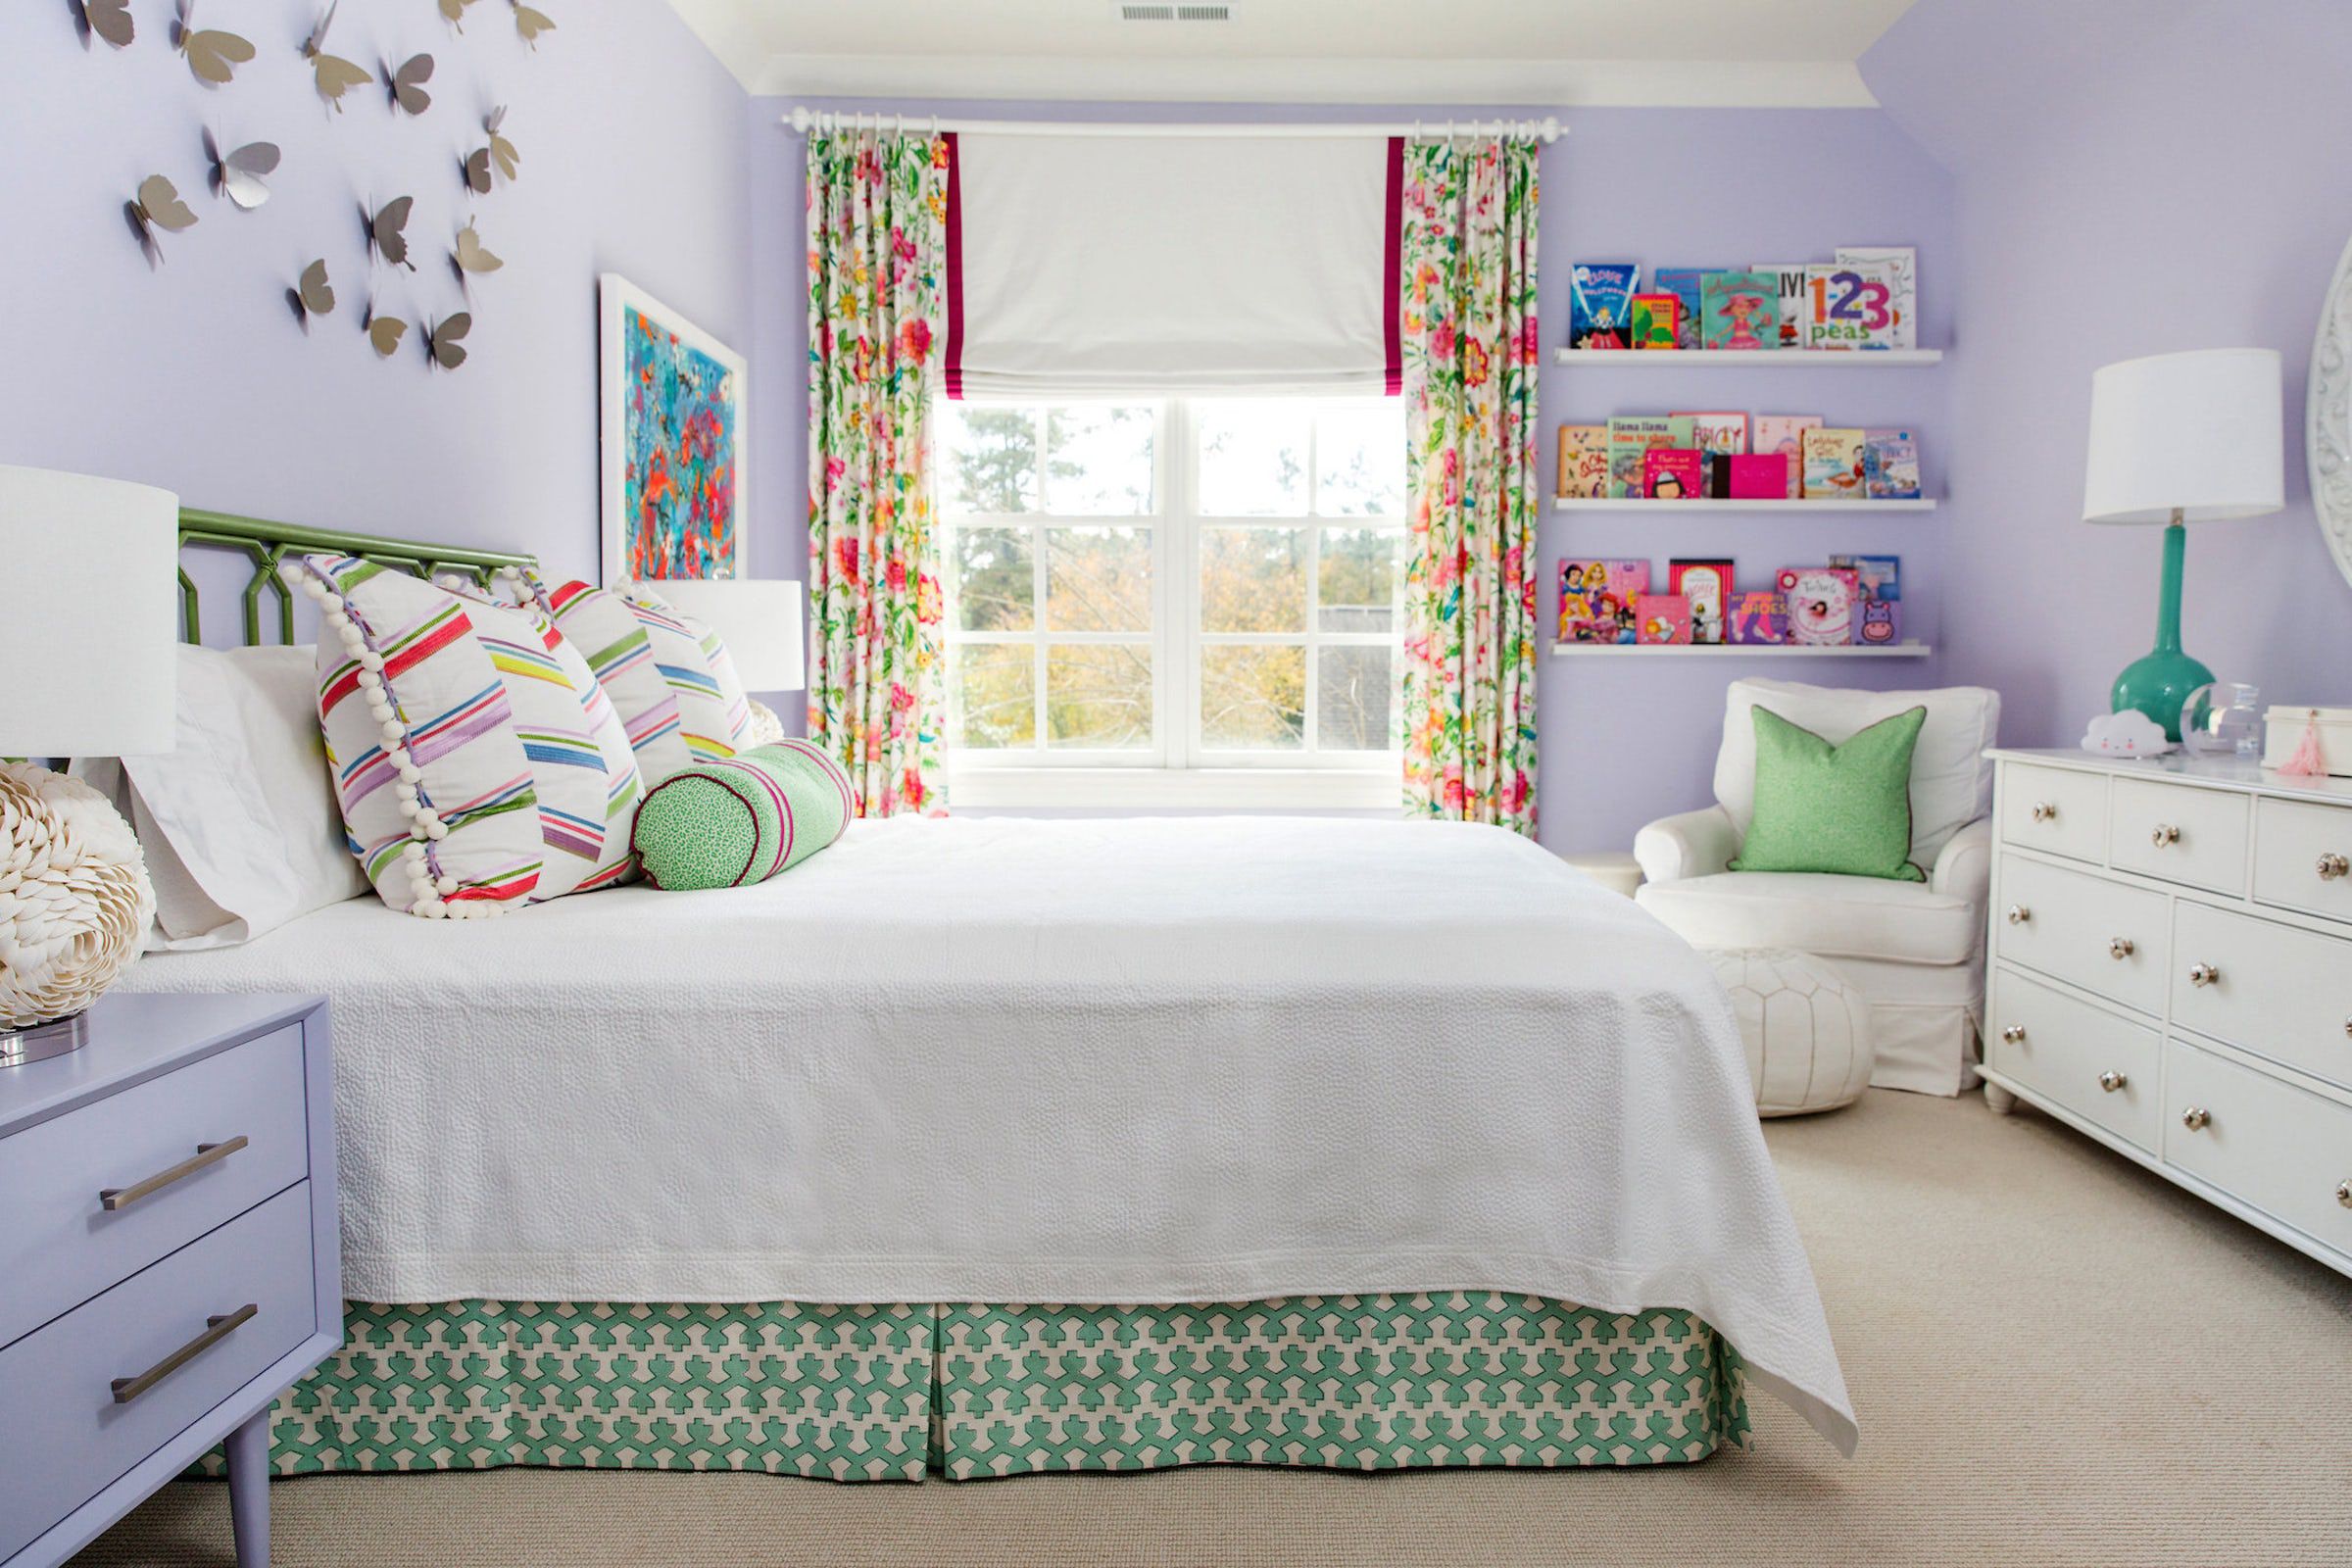 Cheap Ways To Decorate A Girl's Bedroom